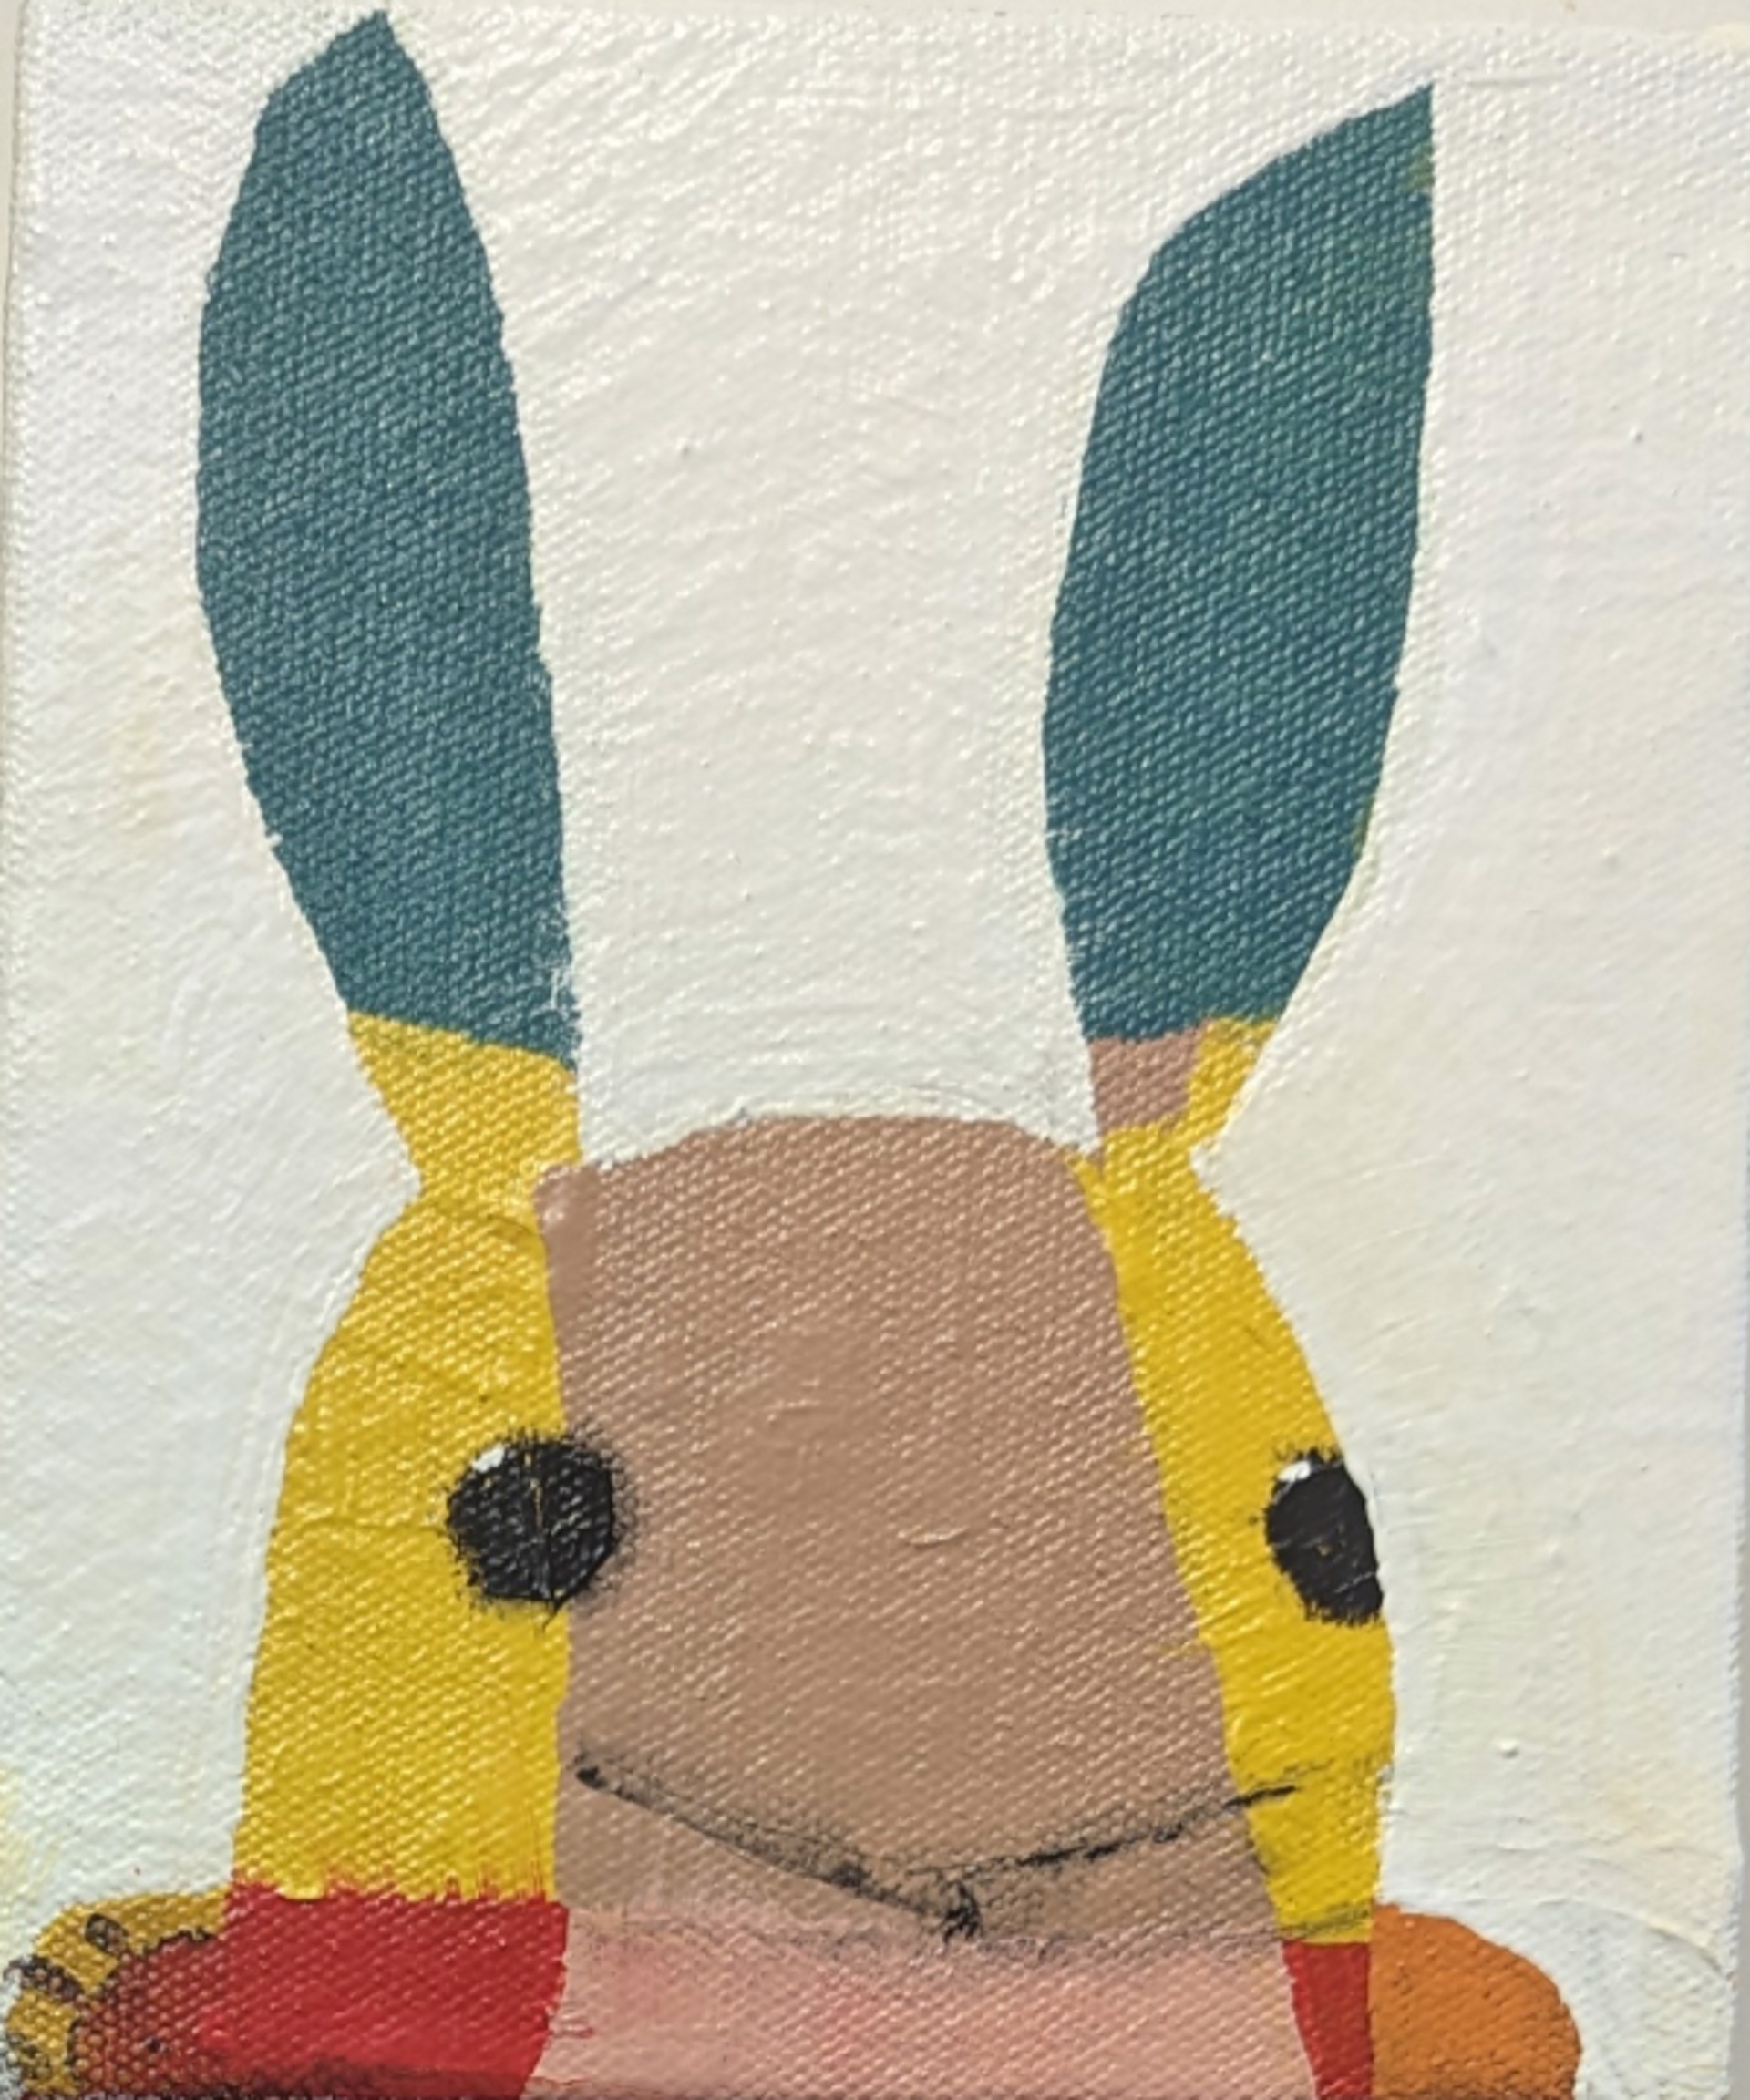 Quilted Bunny #8 by Wendeline Matson